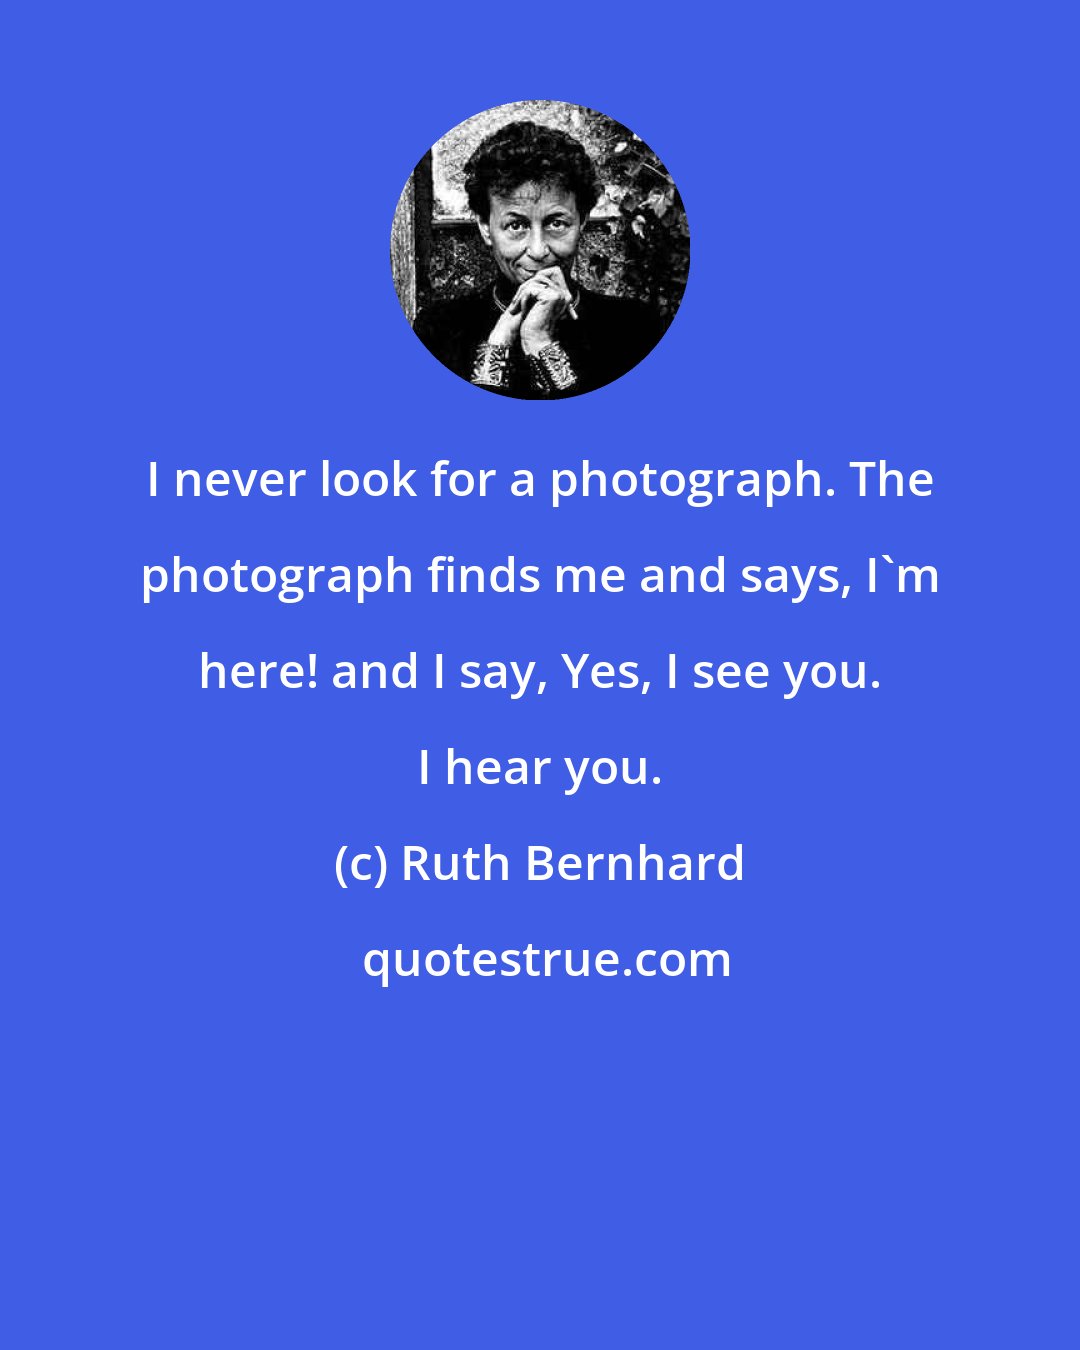 Ruth Bernhard: I never look for a photograph. The photograph finds me and says, I'm here! and I say, Yes, I see you. I hear you.